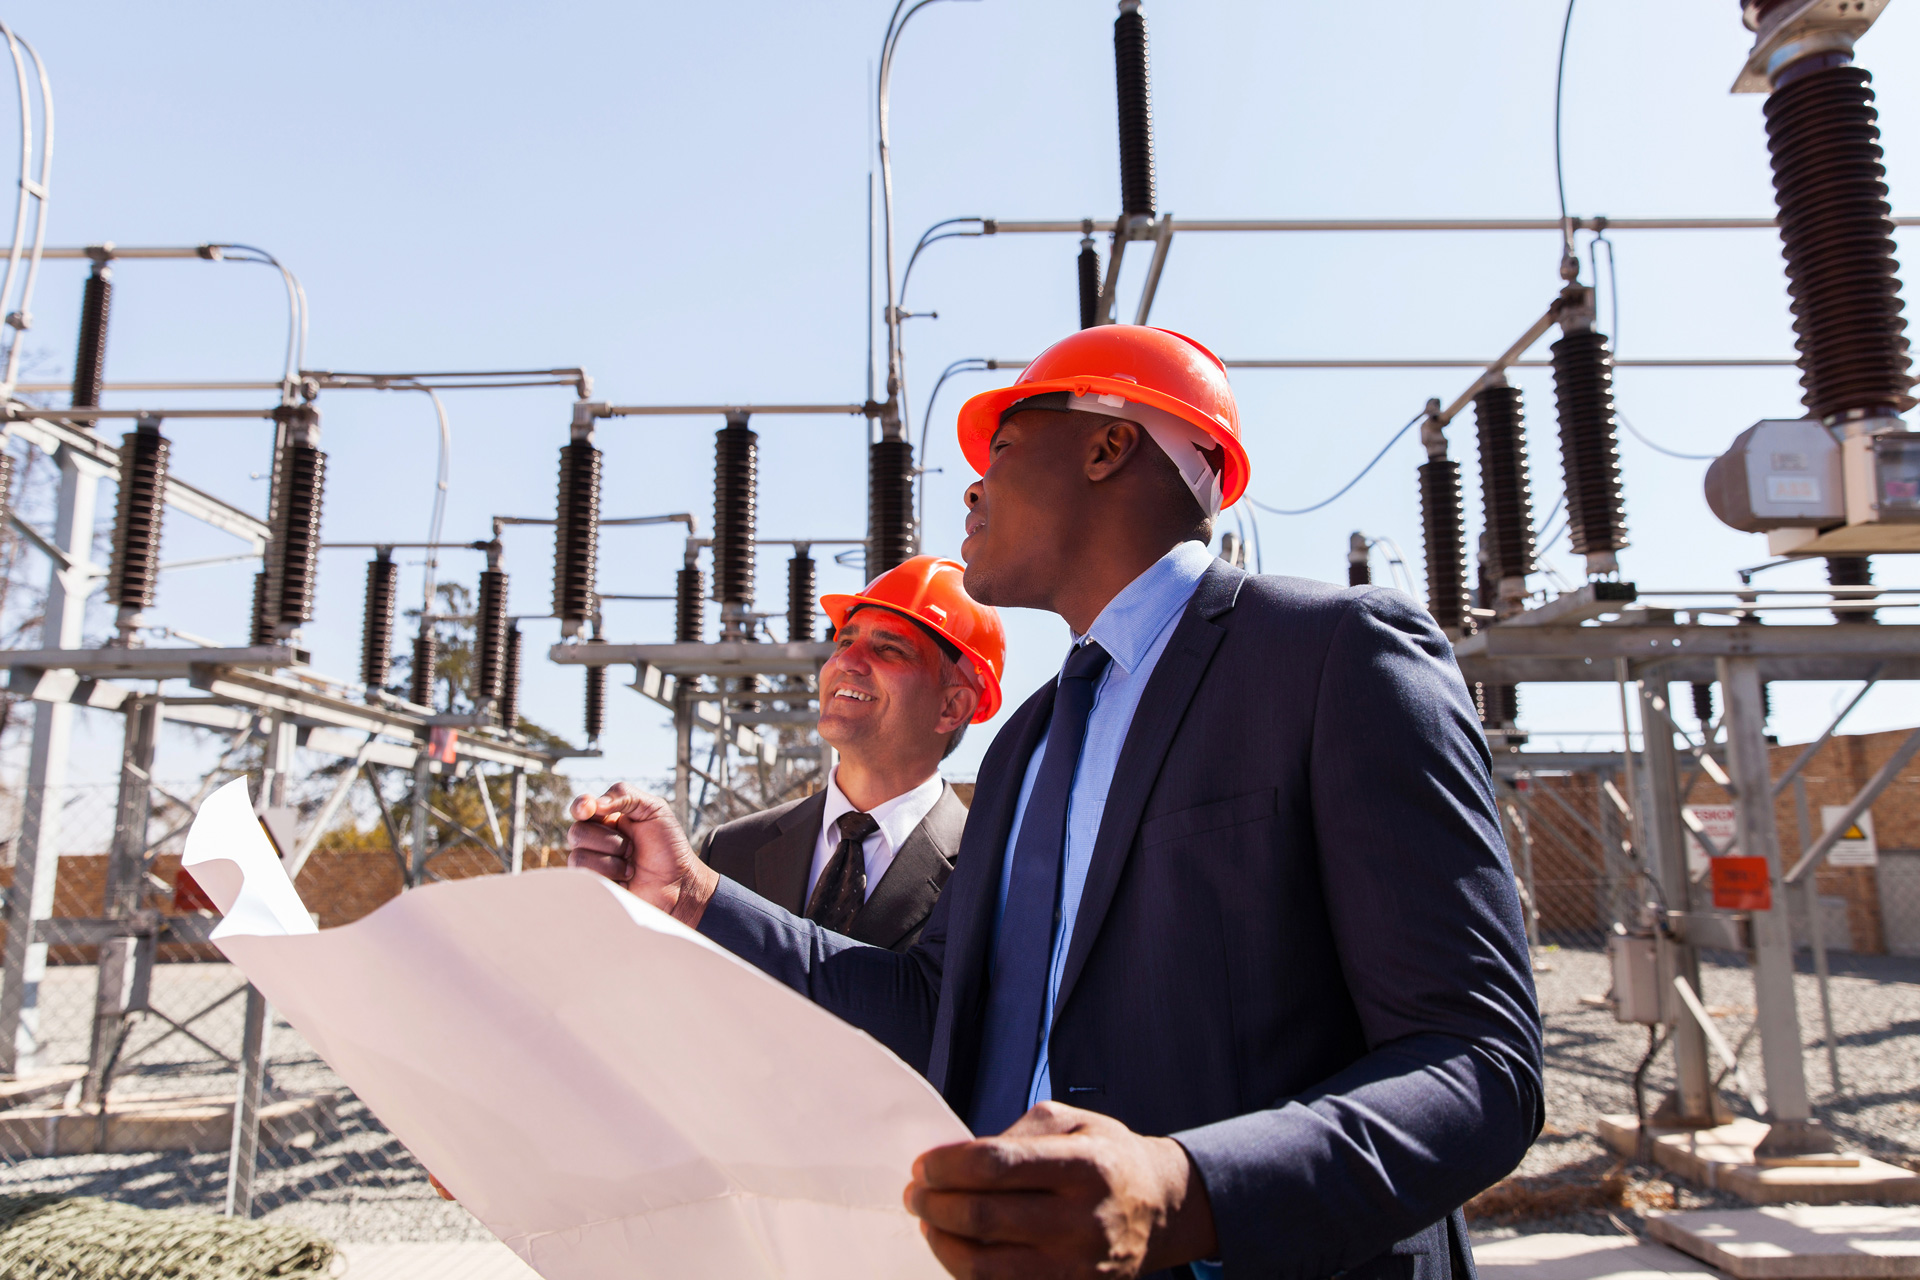 industrial managers working in electric substation